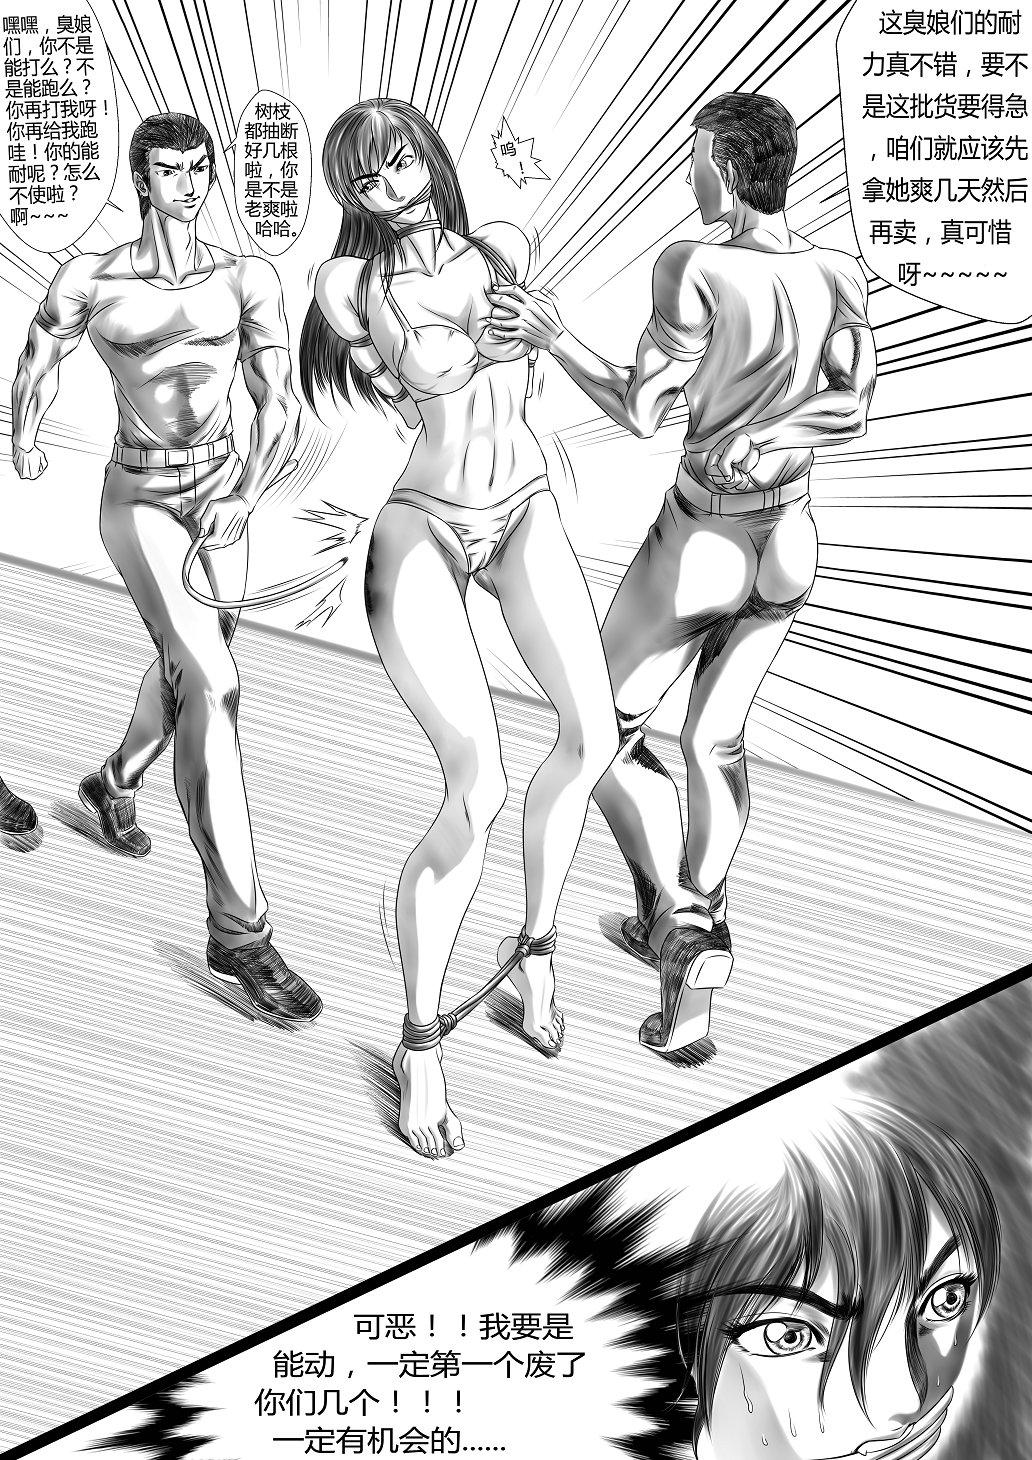 Style 女冠軍與人販 - Original Mofos - Page 11